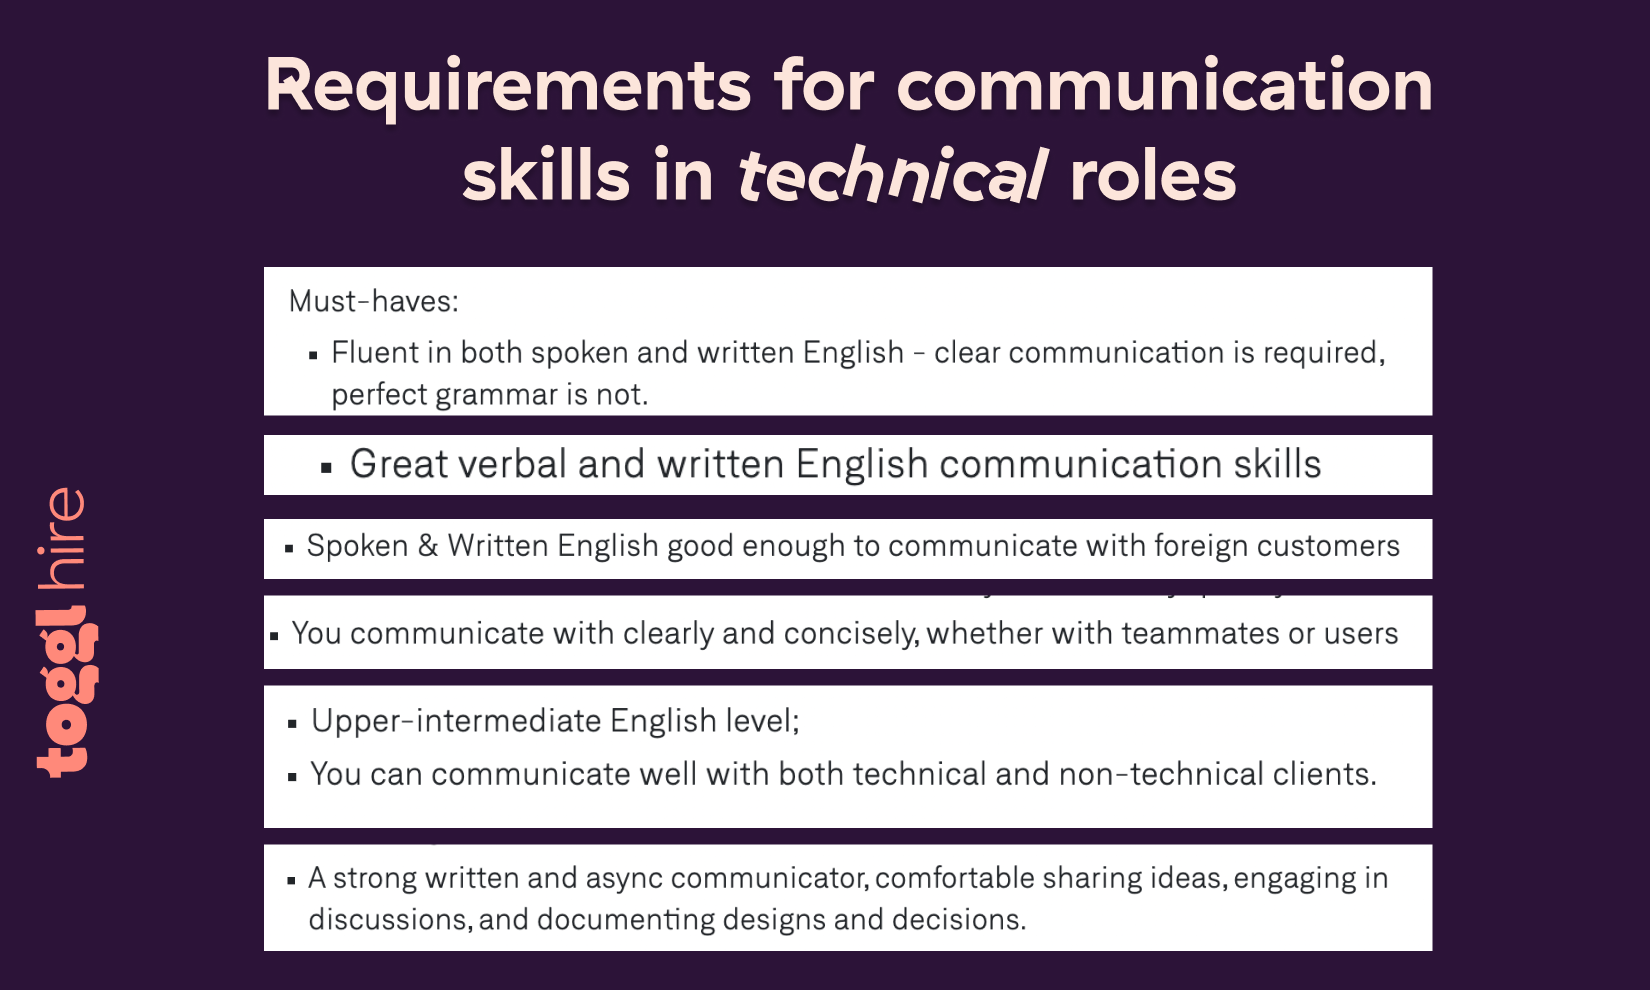 Most job descriptions for technical roles list communication skills as must-haves. 